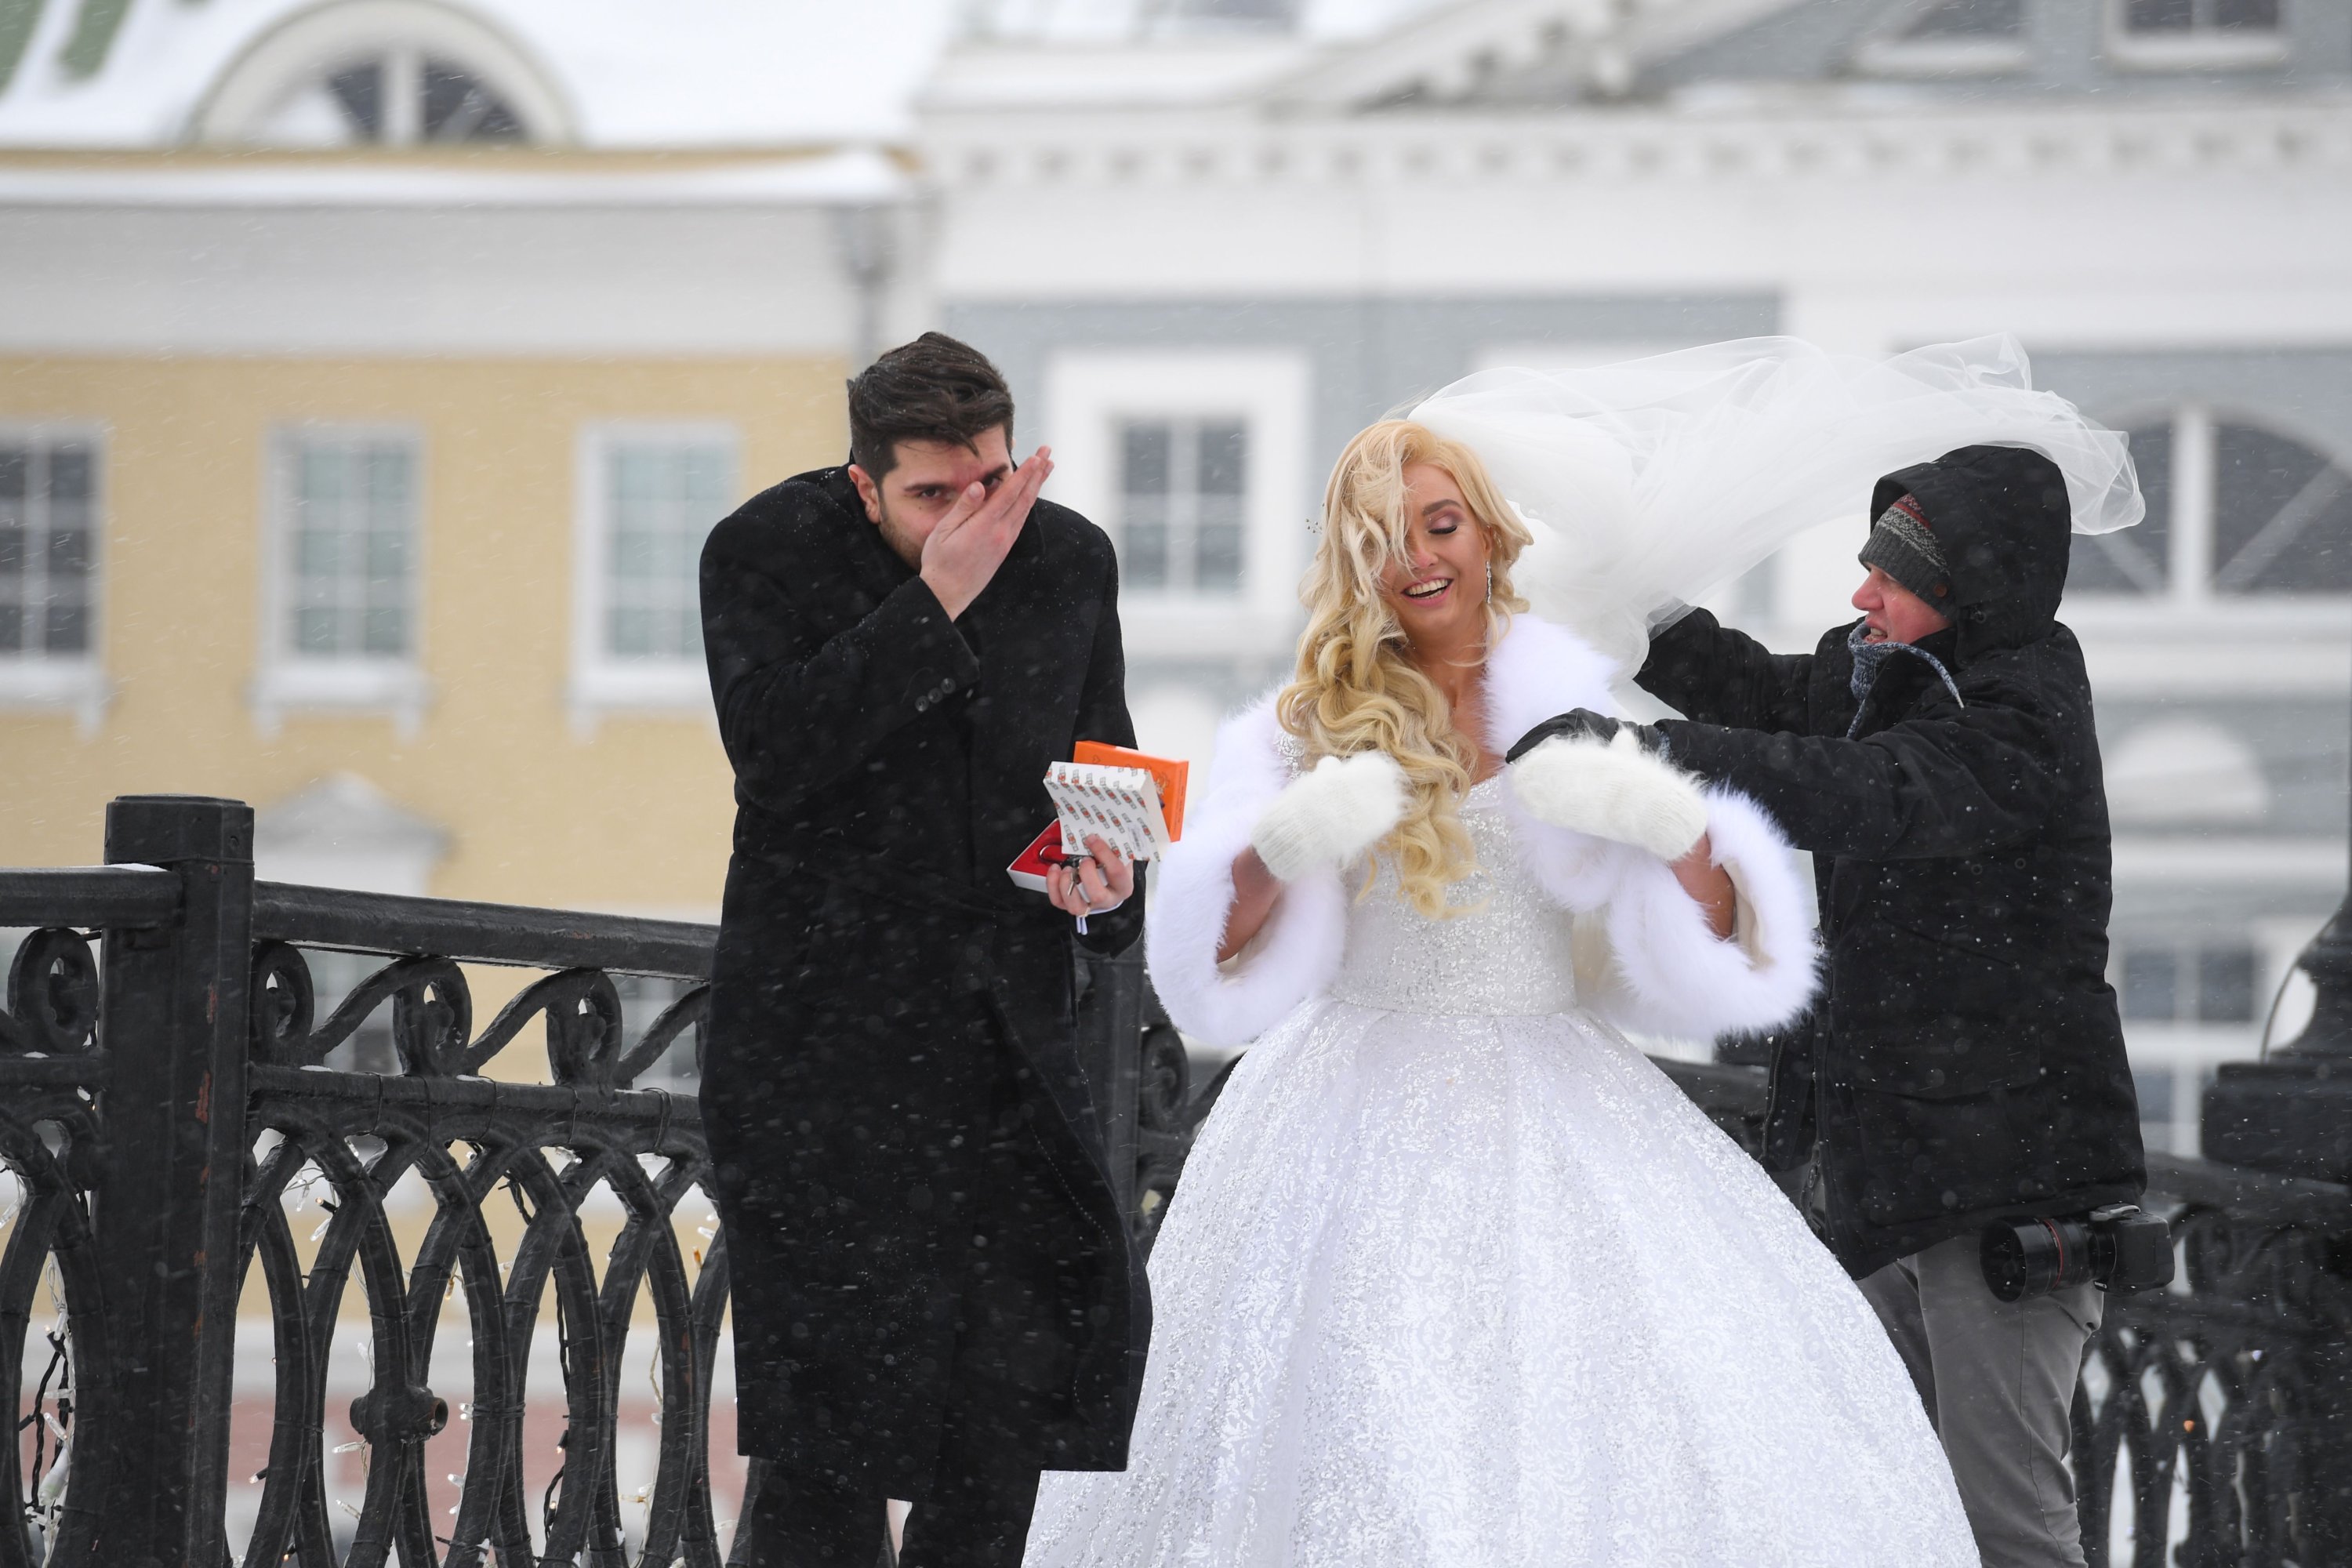 A photographer adjusts the wedding dress of a bride during a photo session on a snowy day in Moscow on Feb. 12, 2021. (AFP Photo)